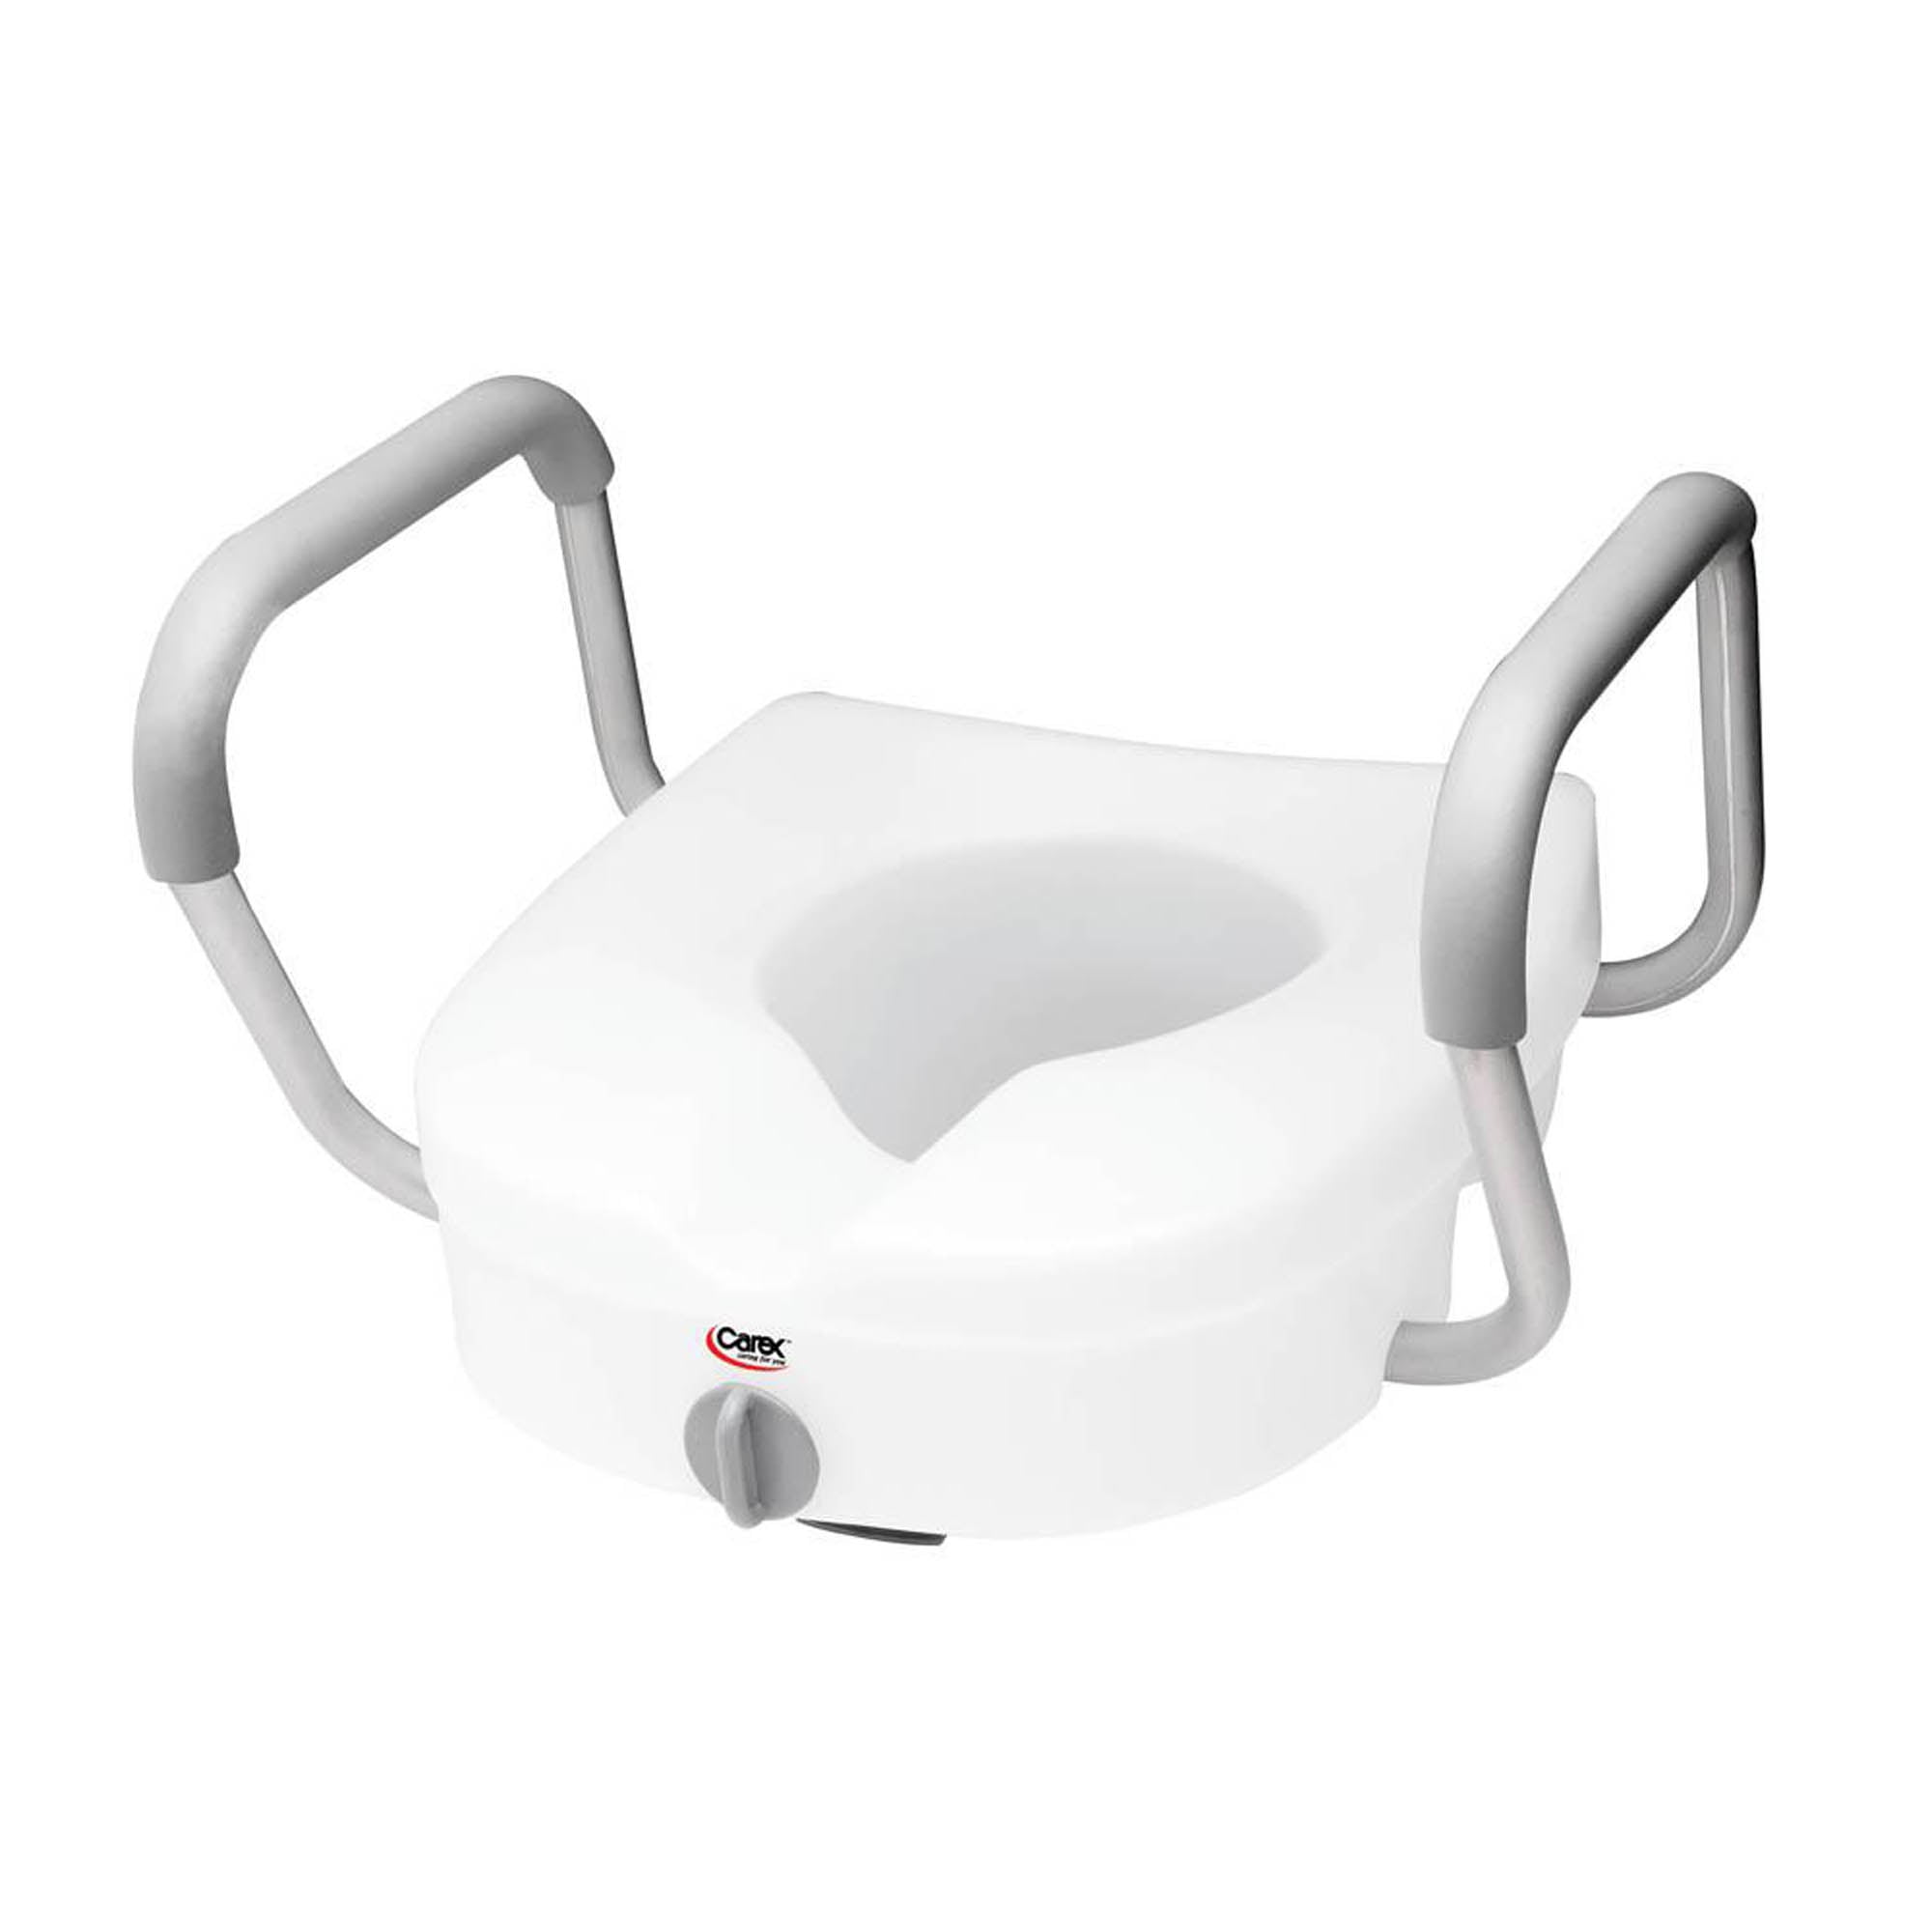 Raised Toilet Seat Carex Toilet Seat Riser Adds 5 Inch of Height to Toilet 